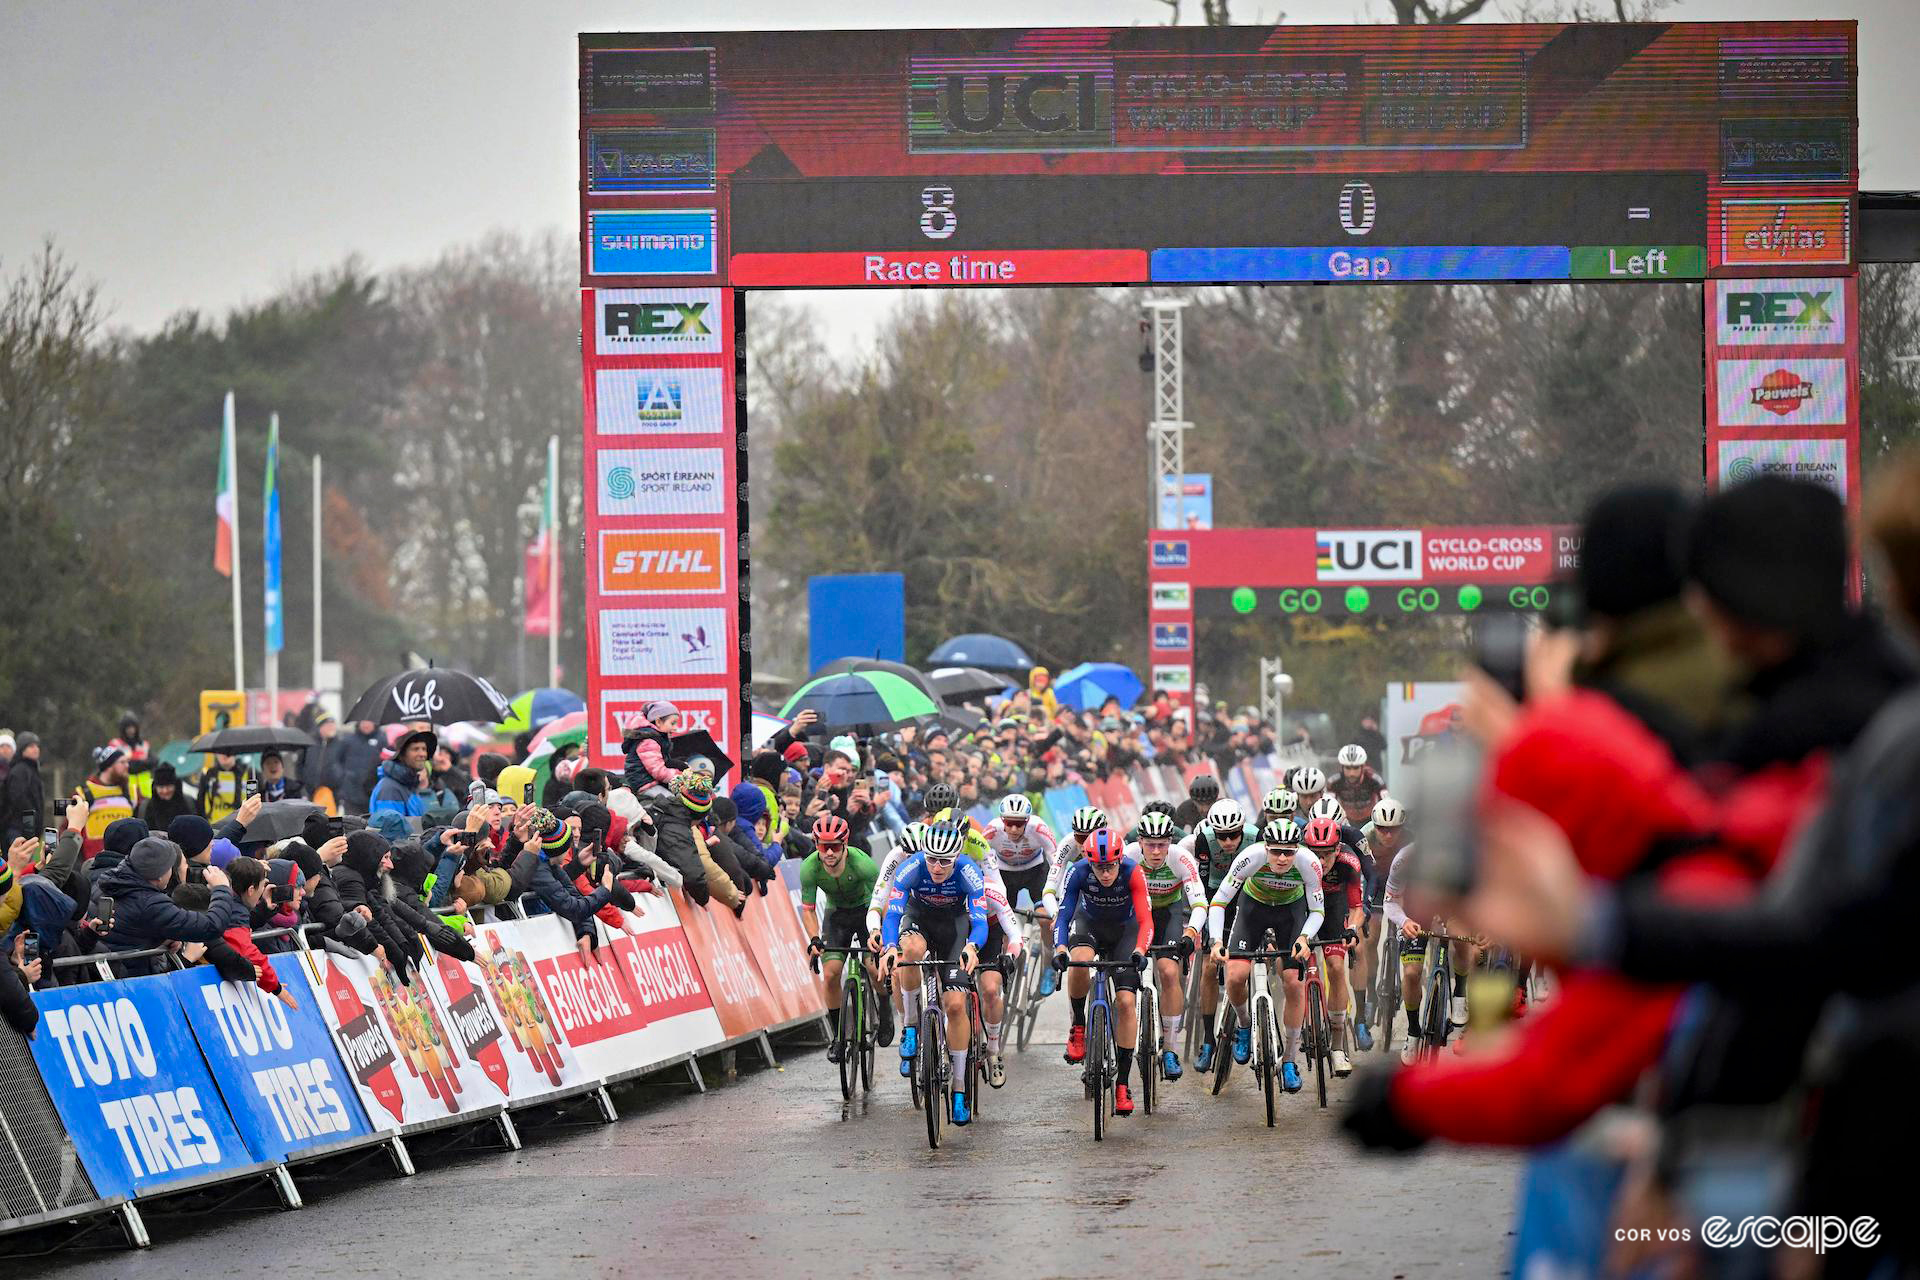 The men's field leaves the start line of CX World Cup Dublin, cheered on by a big crowd despite the rain.